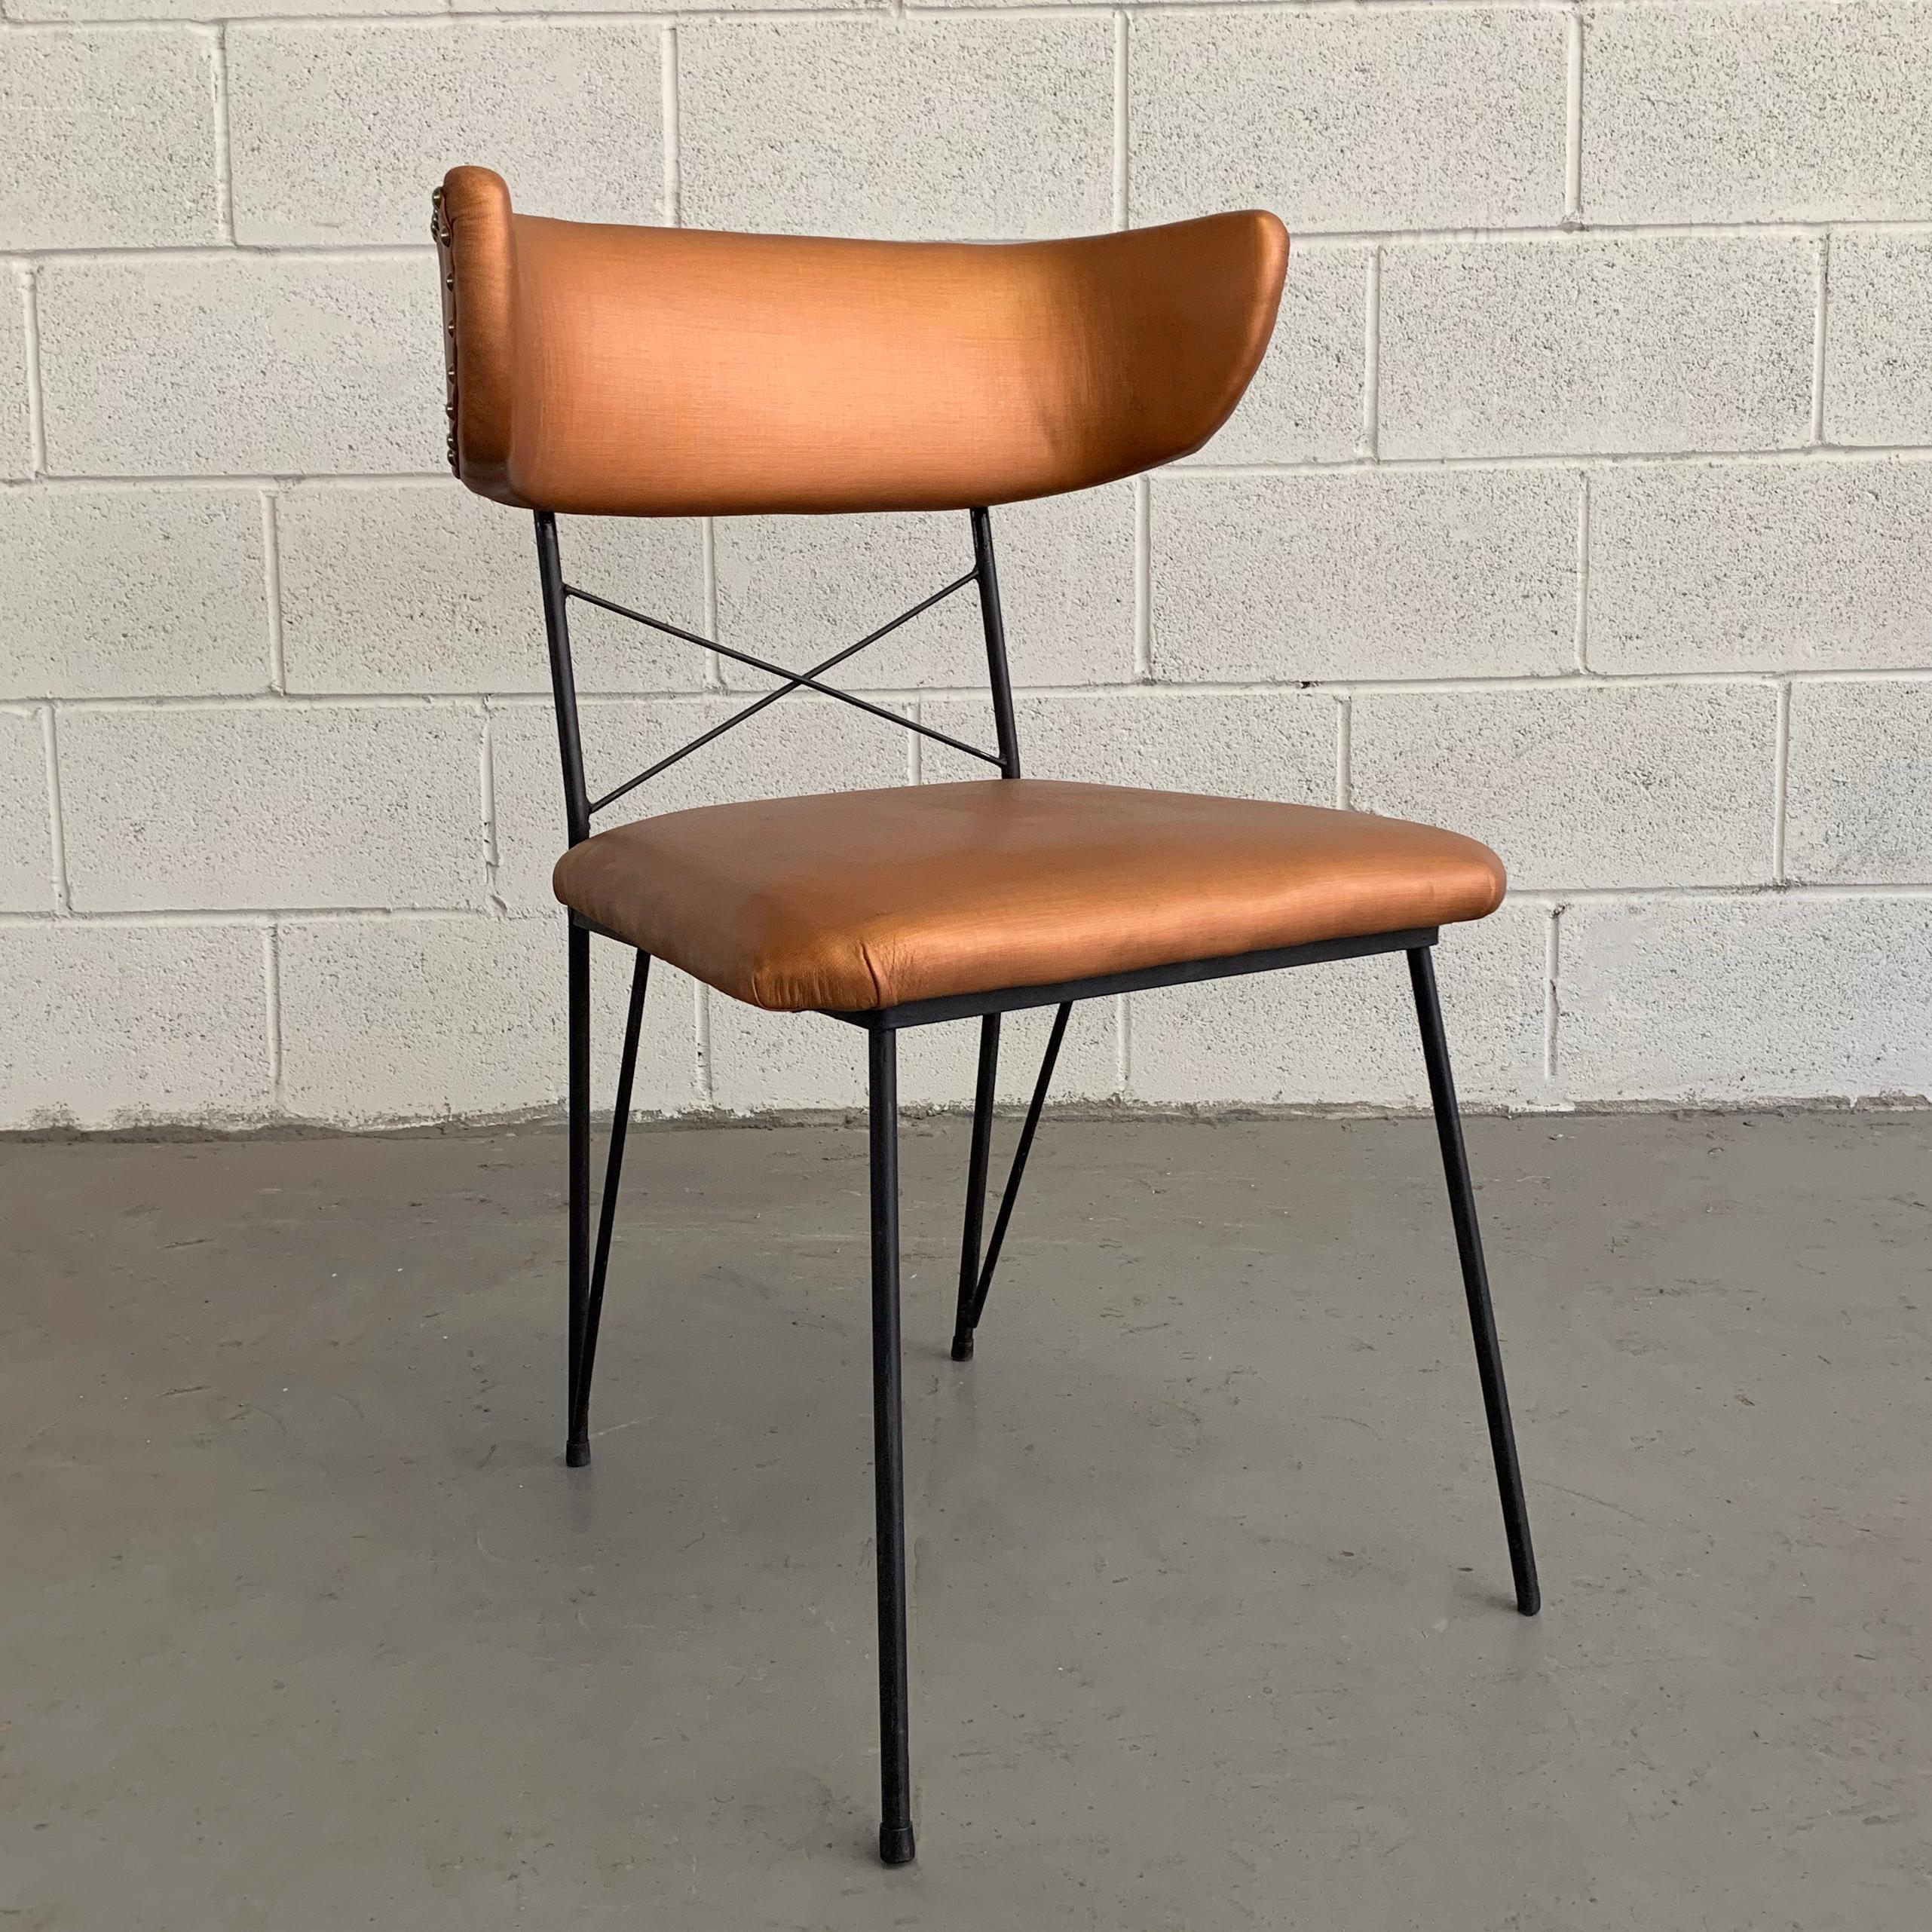 20th Century Mid-Century Modern Upholstered Wrought Iron Side Chair